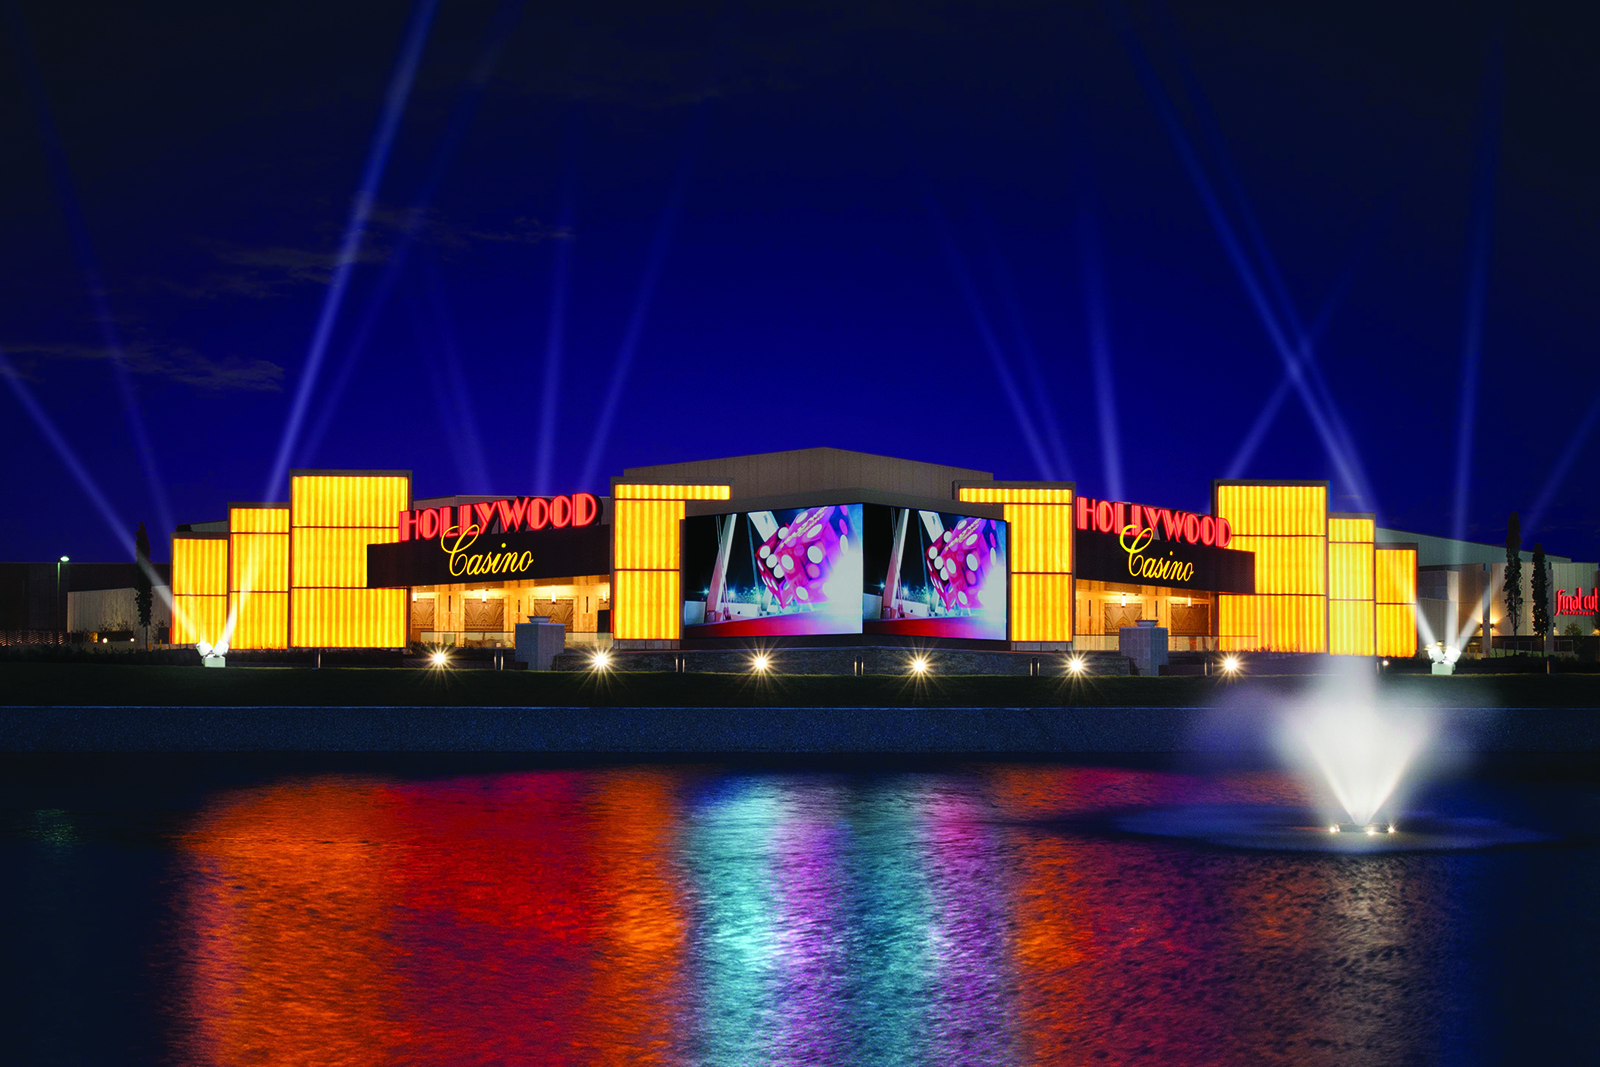 Hollywood Casino Columbus buffet, restaurant, promotions, poker, jobs, and concerts/events.  Located in Columbus, OH.